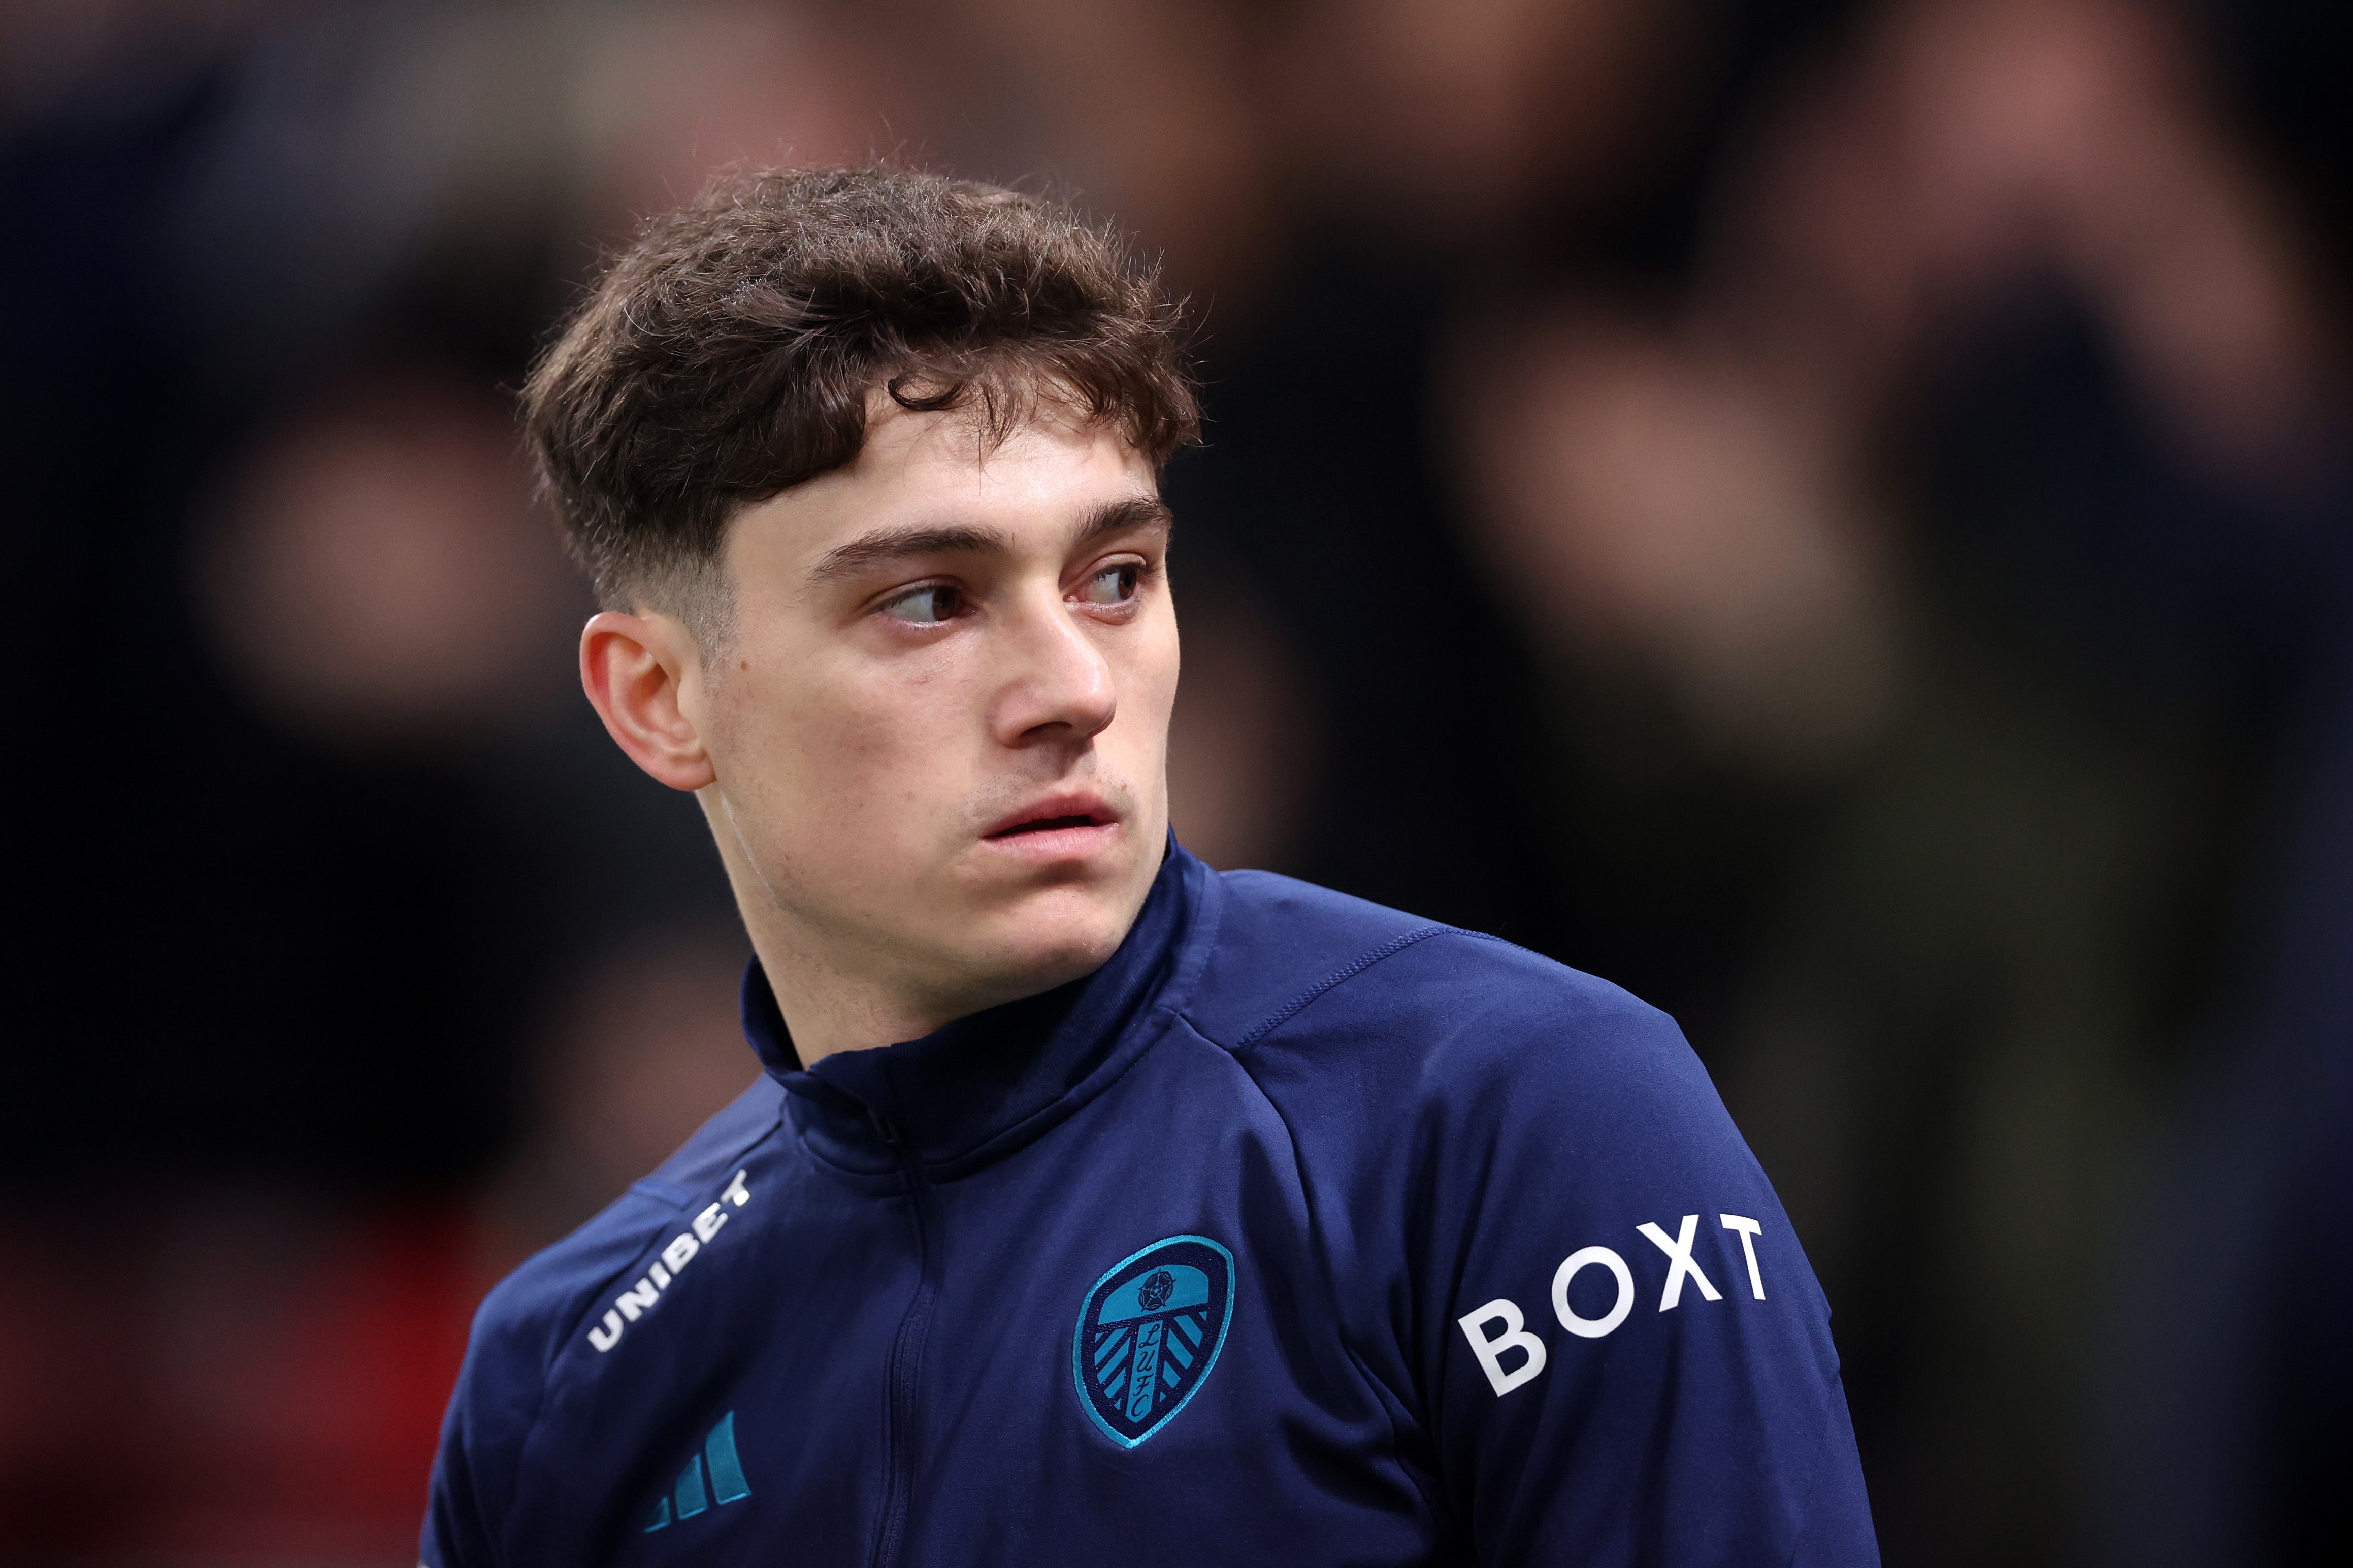 

<p>Daniel James was named in the starting line up for Leeds</p>
<p>” height=”3089″ width=”4633.5″ layout=”responsive” data-hero i-amphtml-ssr i-amphtml-layout=”responsive”><i-amphtml-sizer slot=